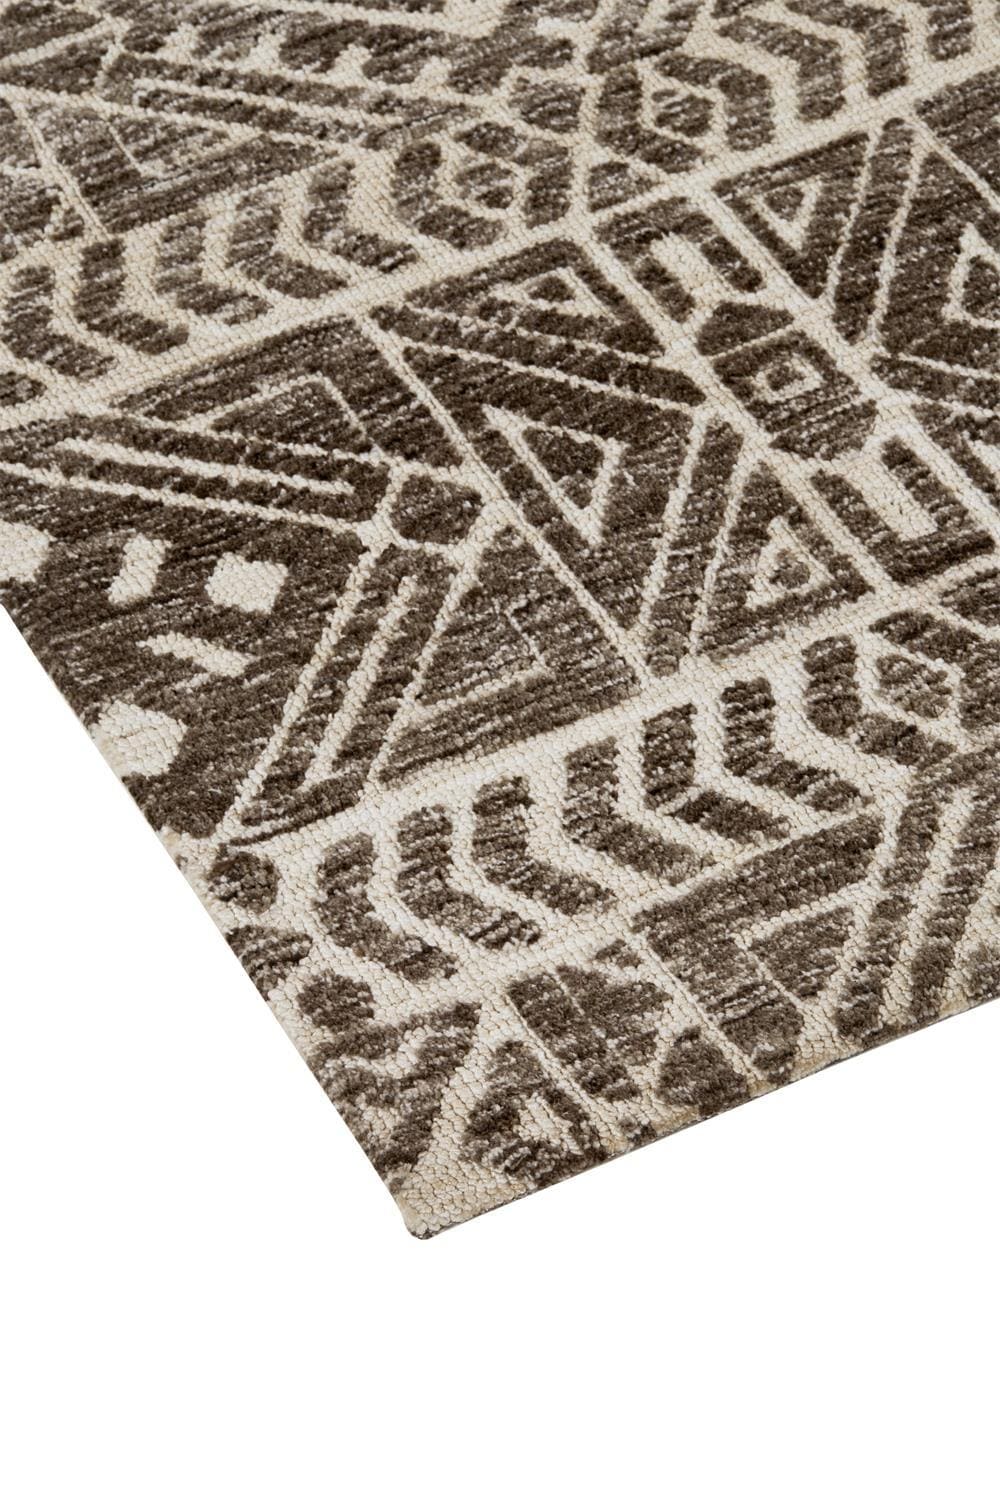 Feizy Feizy Colton Modern Mid-century Tribal Rug - Brown & Charcoal Gray - Available in 5 Sizes